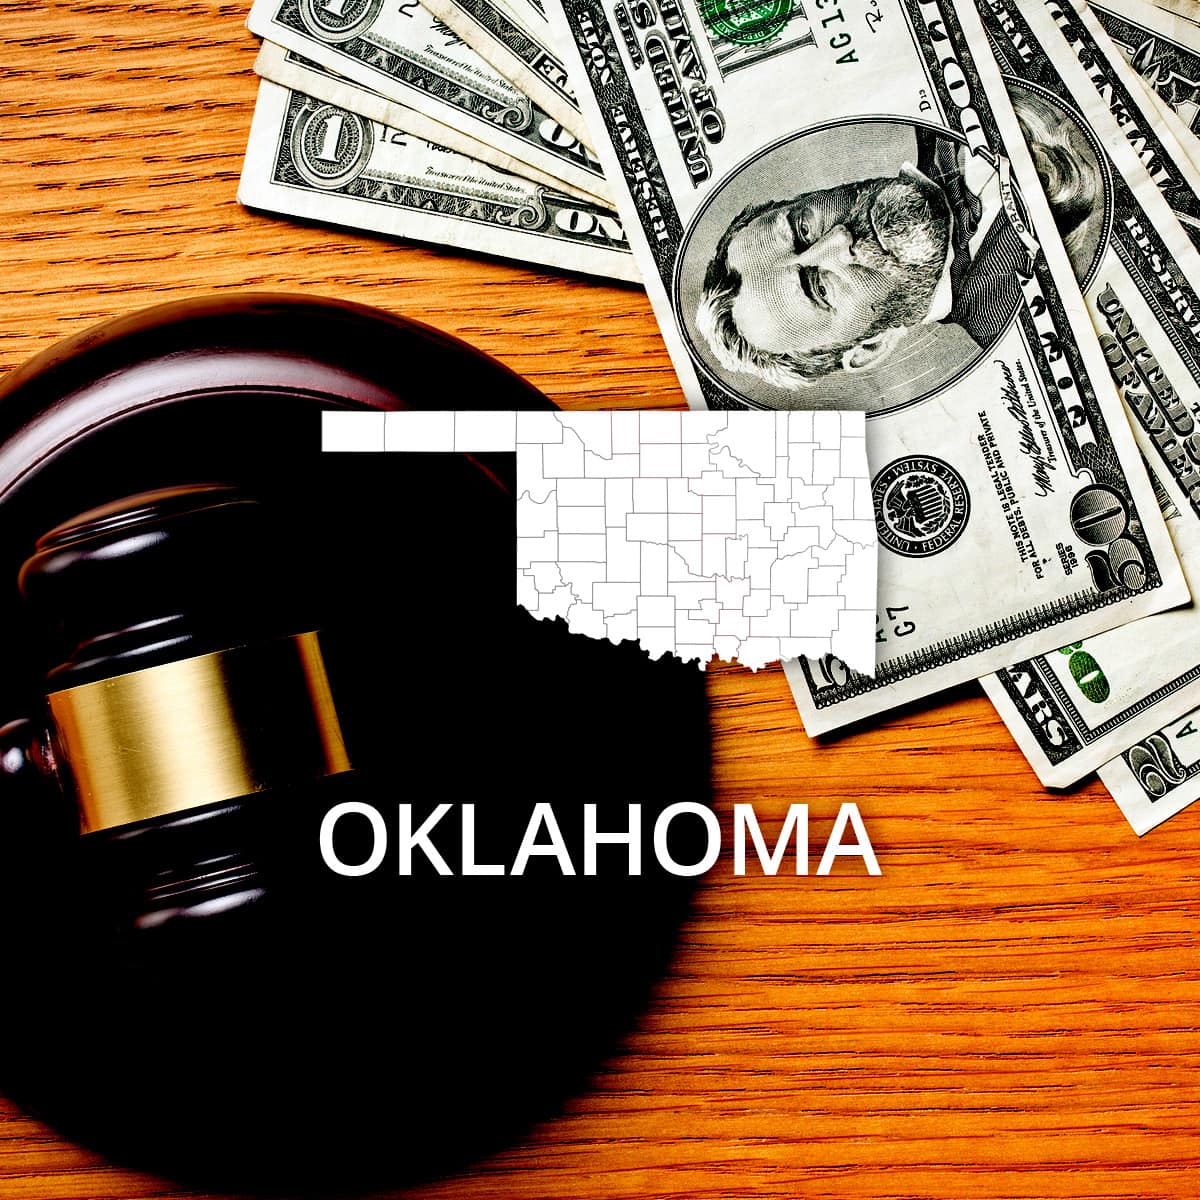 How to File Bankruptcy in Oklahoma - RecordsFinder